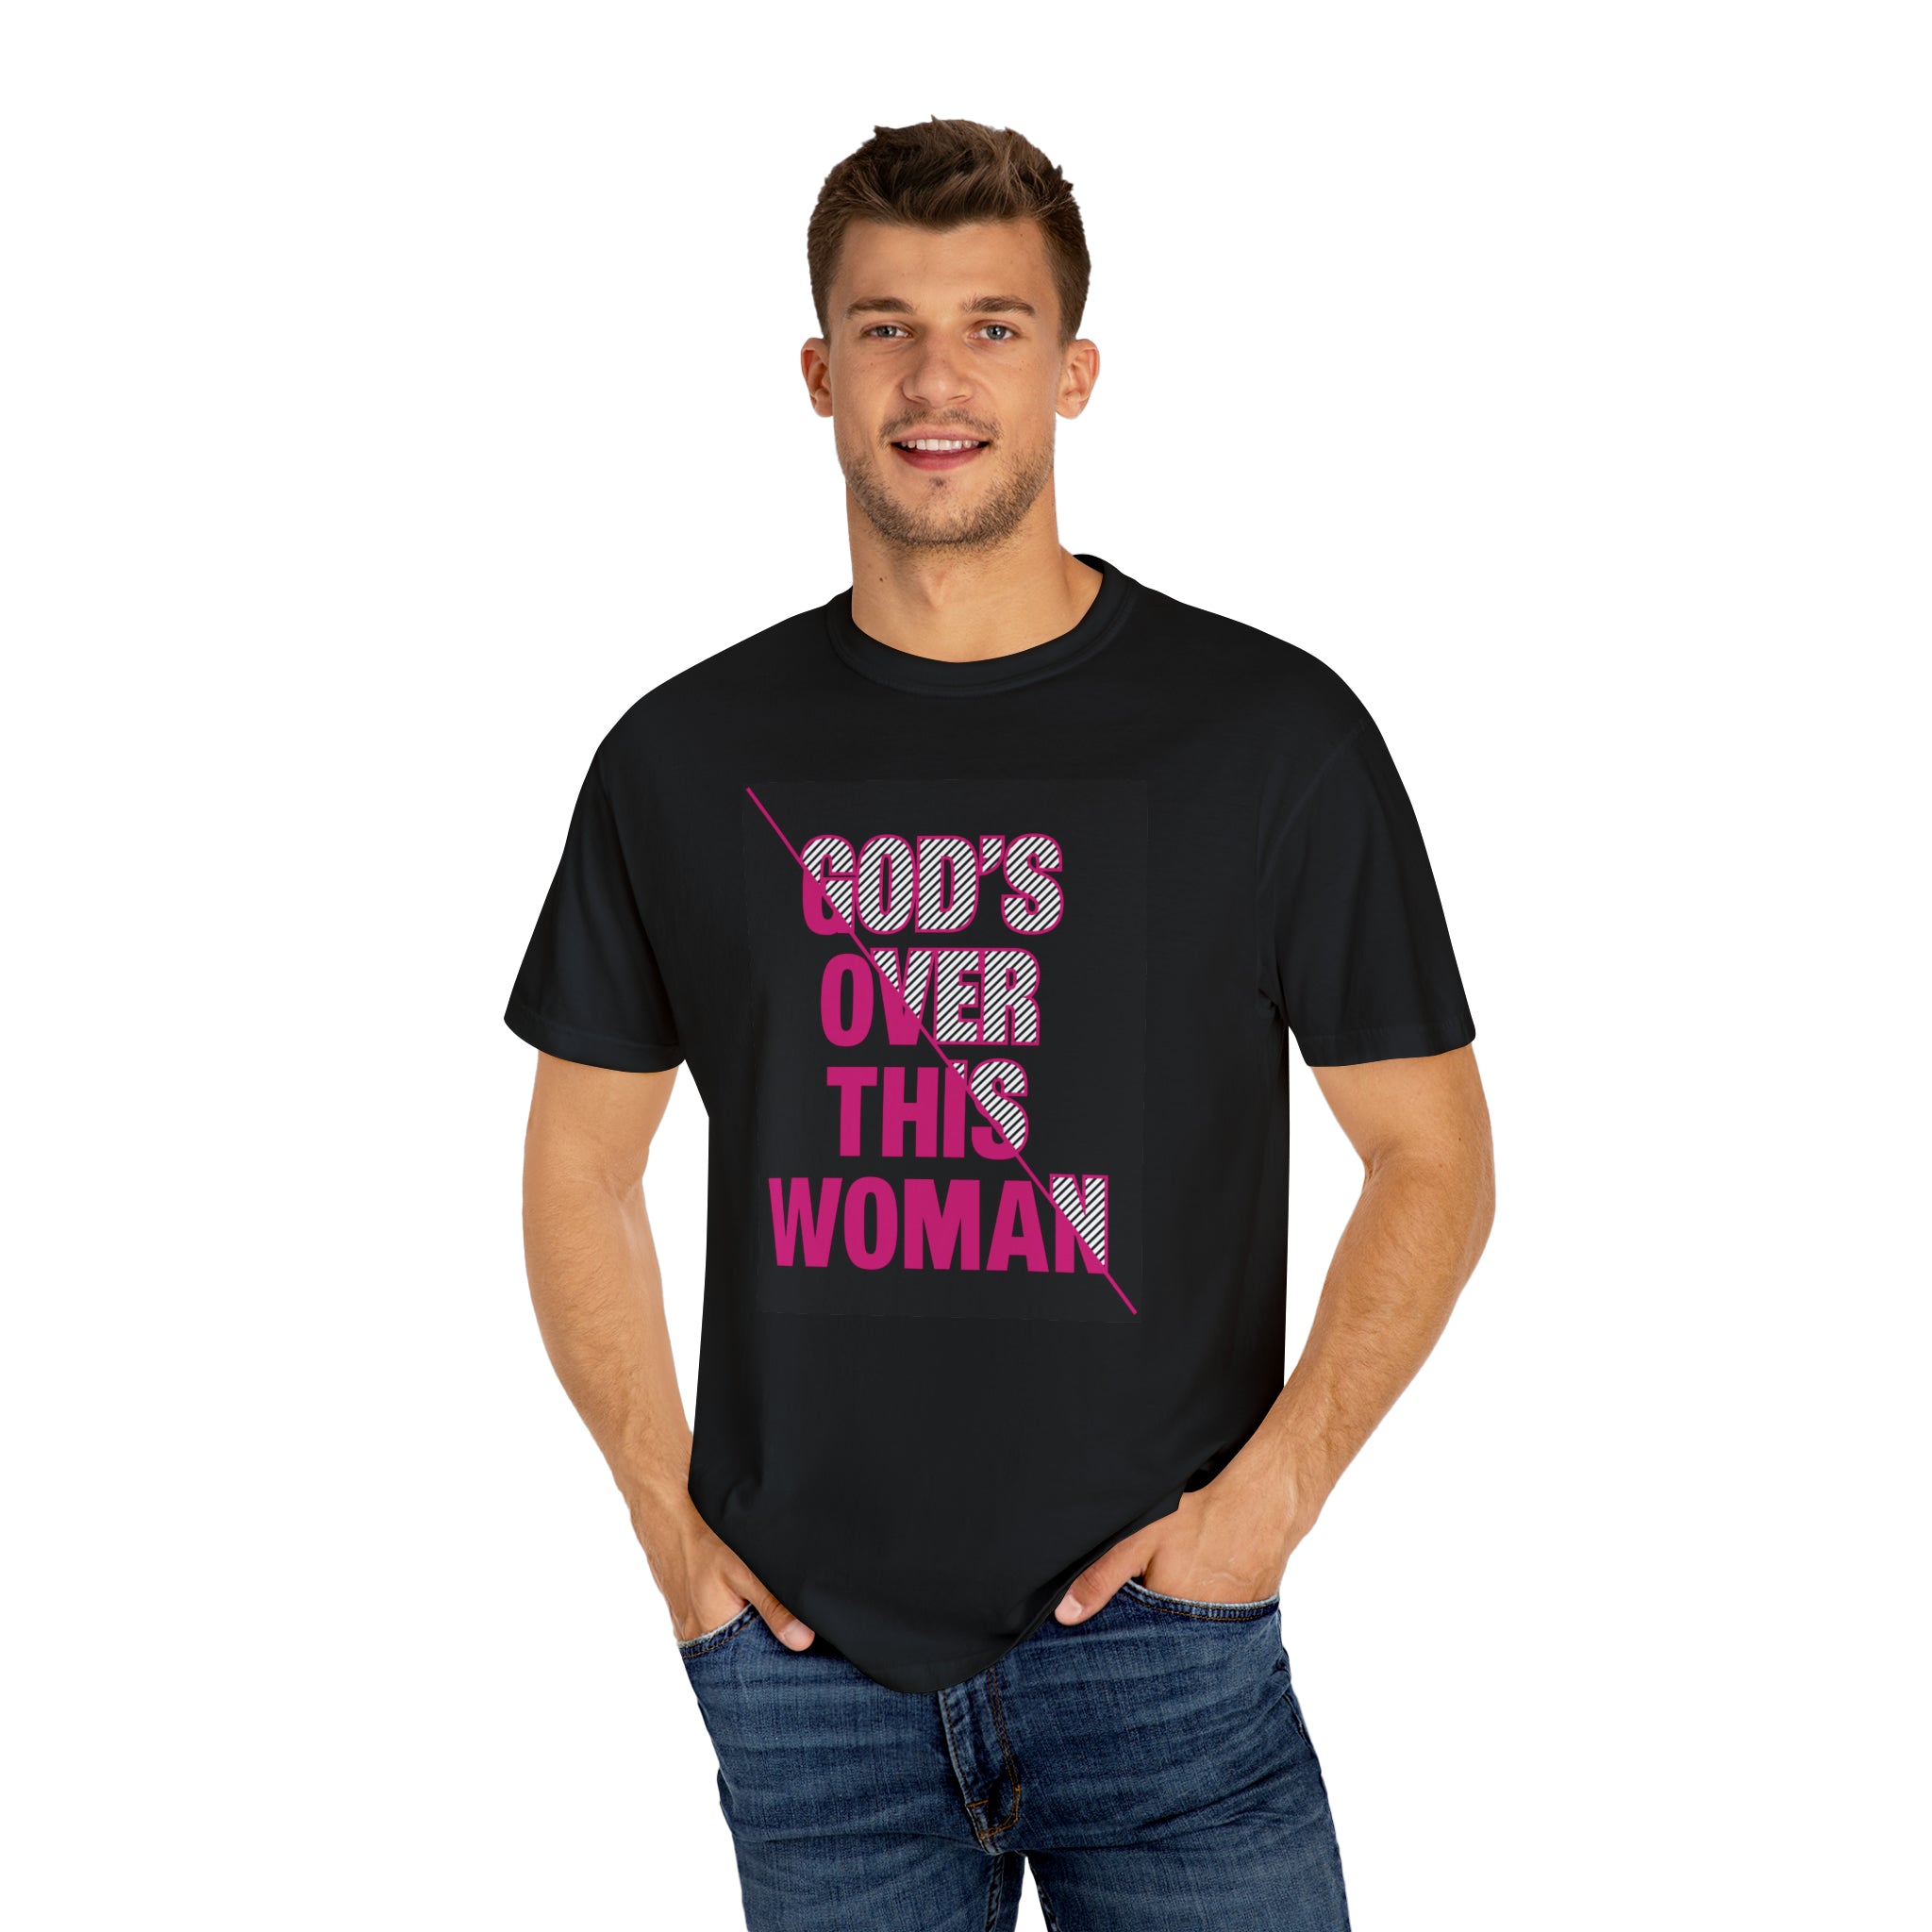 GODs' Over This Woman Pink -Unisex Garment-Dyed T-shirt